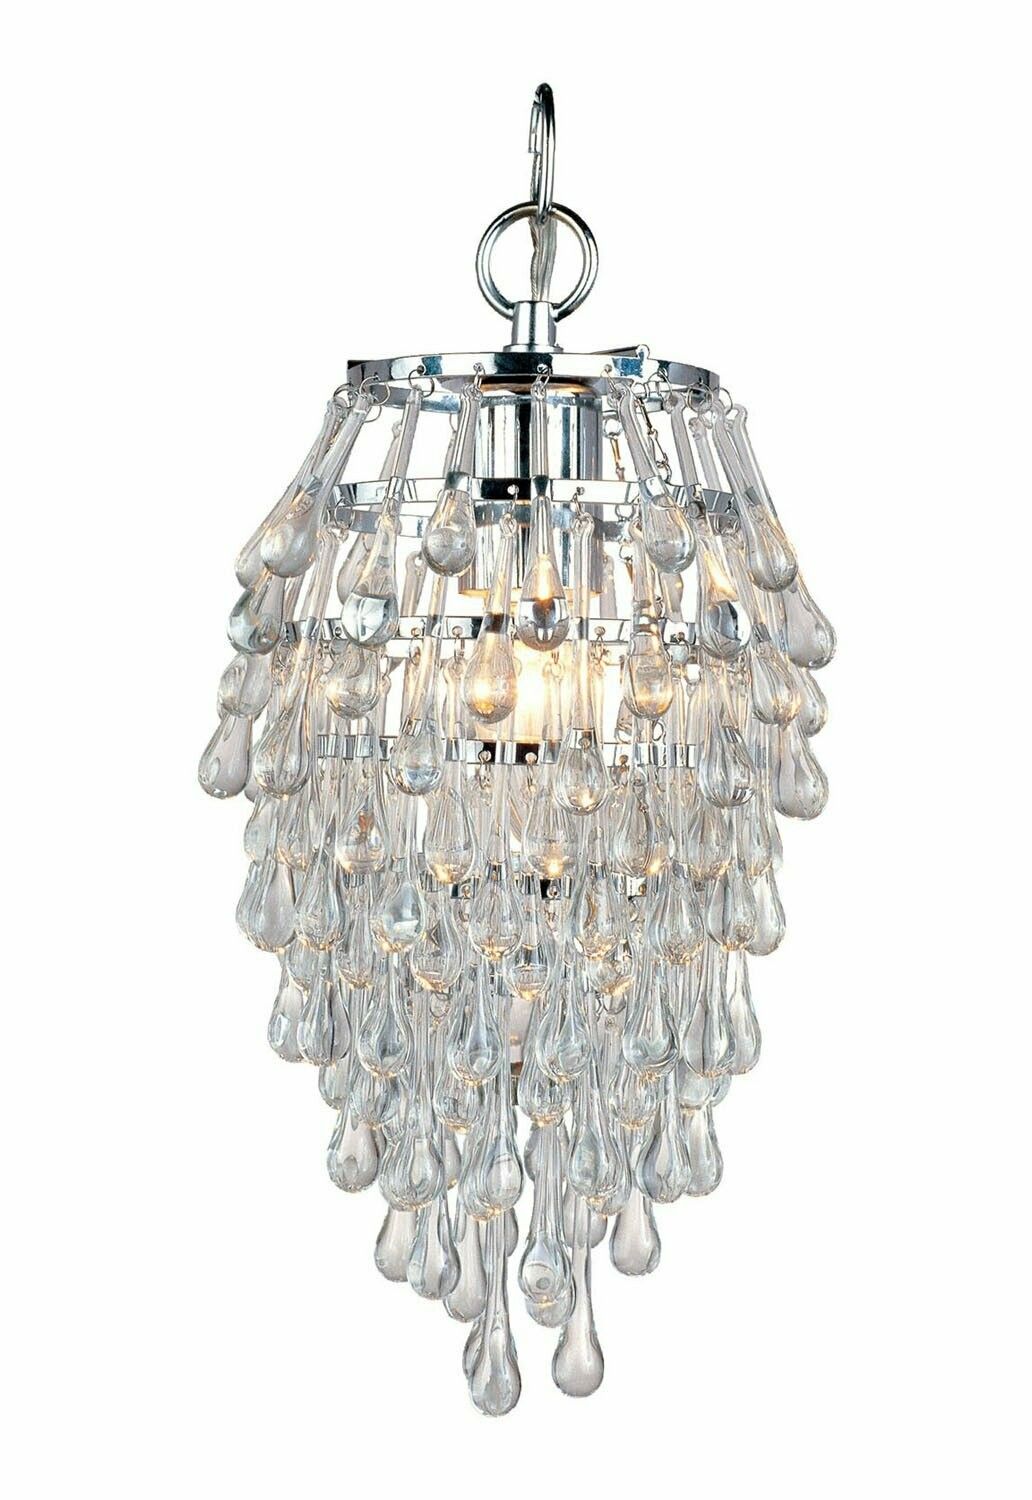 Chrome Finish 1 Light Crystal Teardrop Mini Chandelier Throughout Chrome And Crystal Pendant Lights (View 13 of 15)